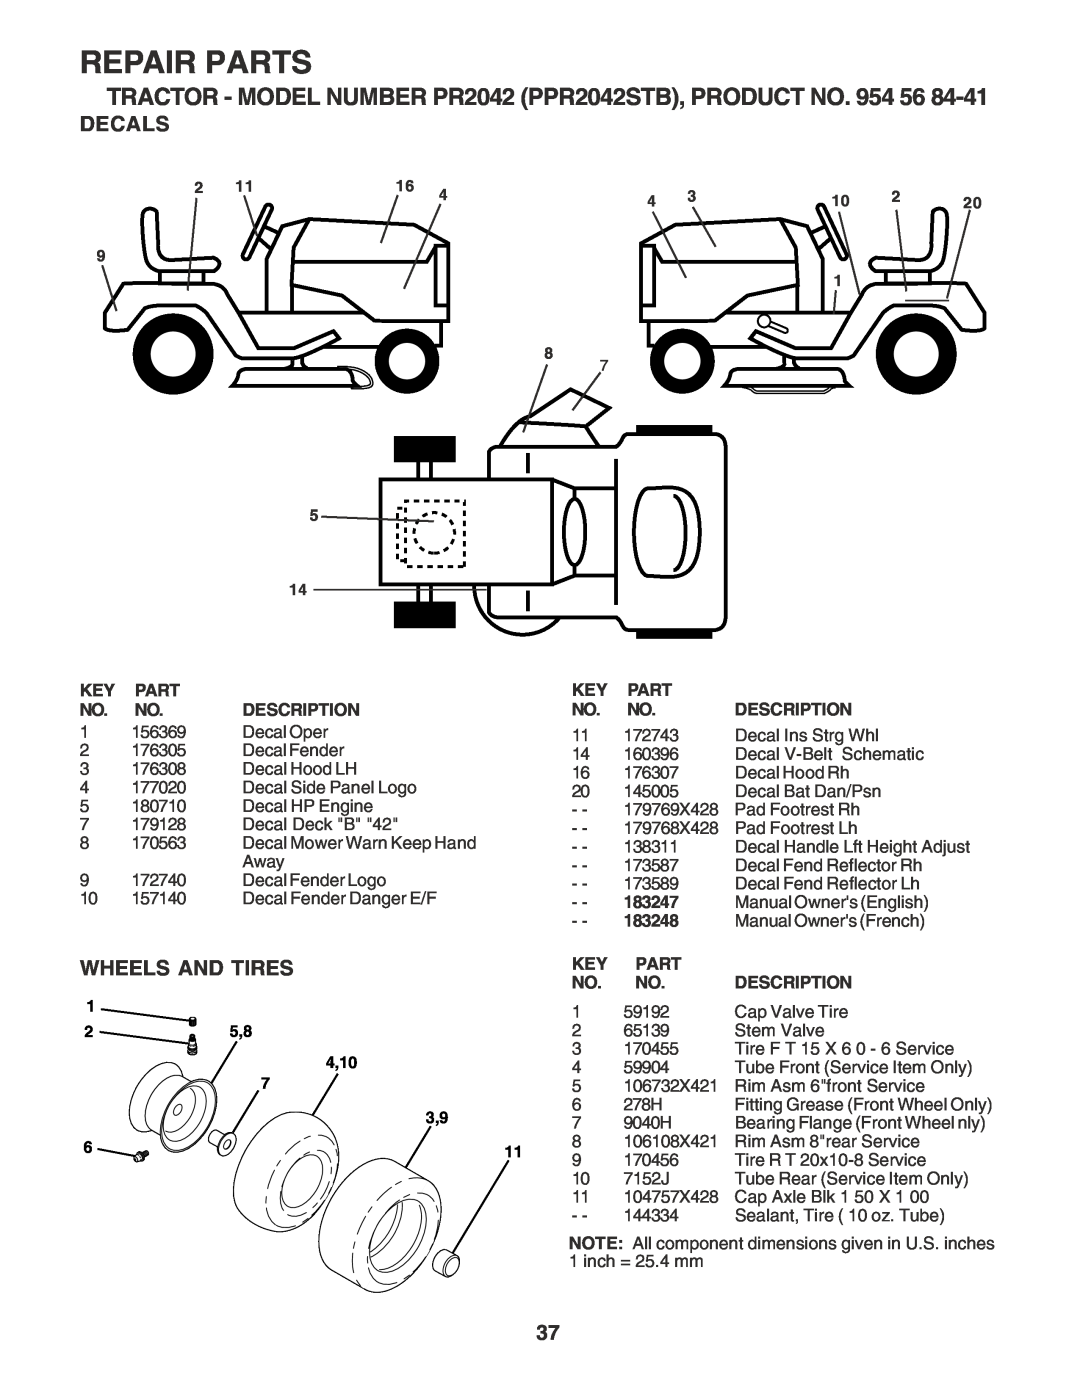 Poulan Decals, Wheels And Tires, Repair Parts, TRACTOR - MODEL NUMBER PR2042 PPR2042STB, PRODUCT NO, Description 